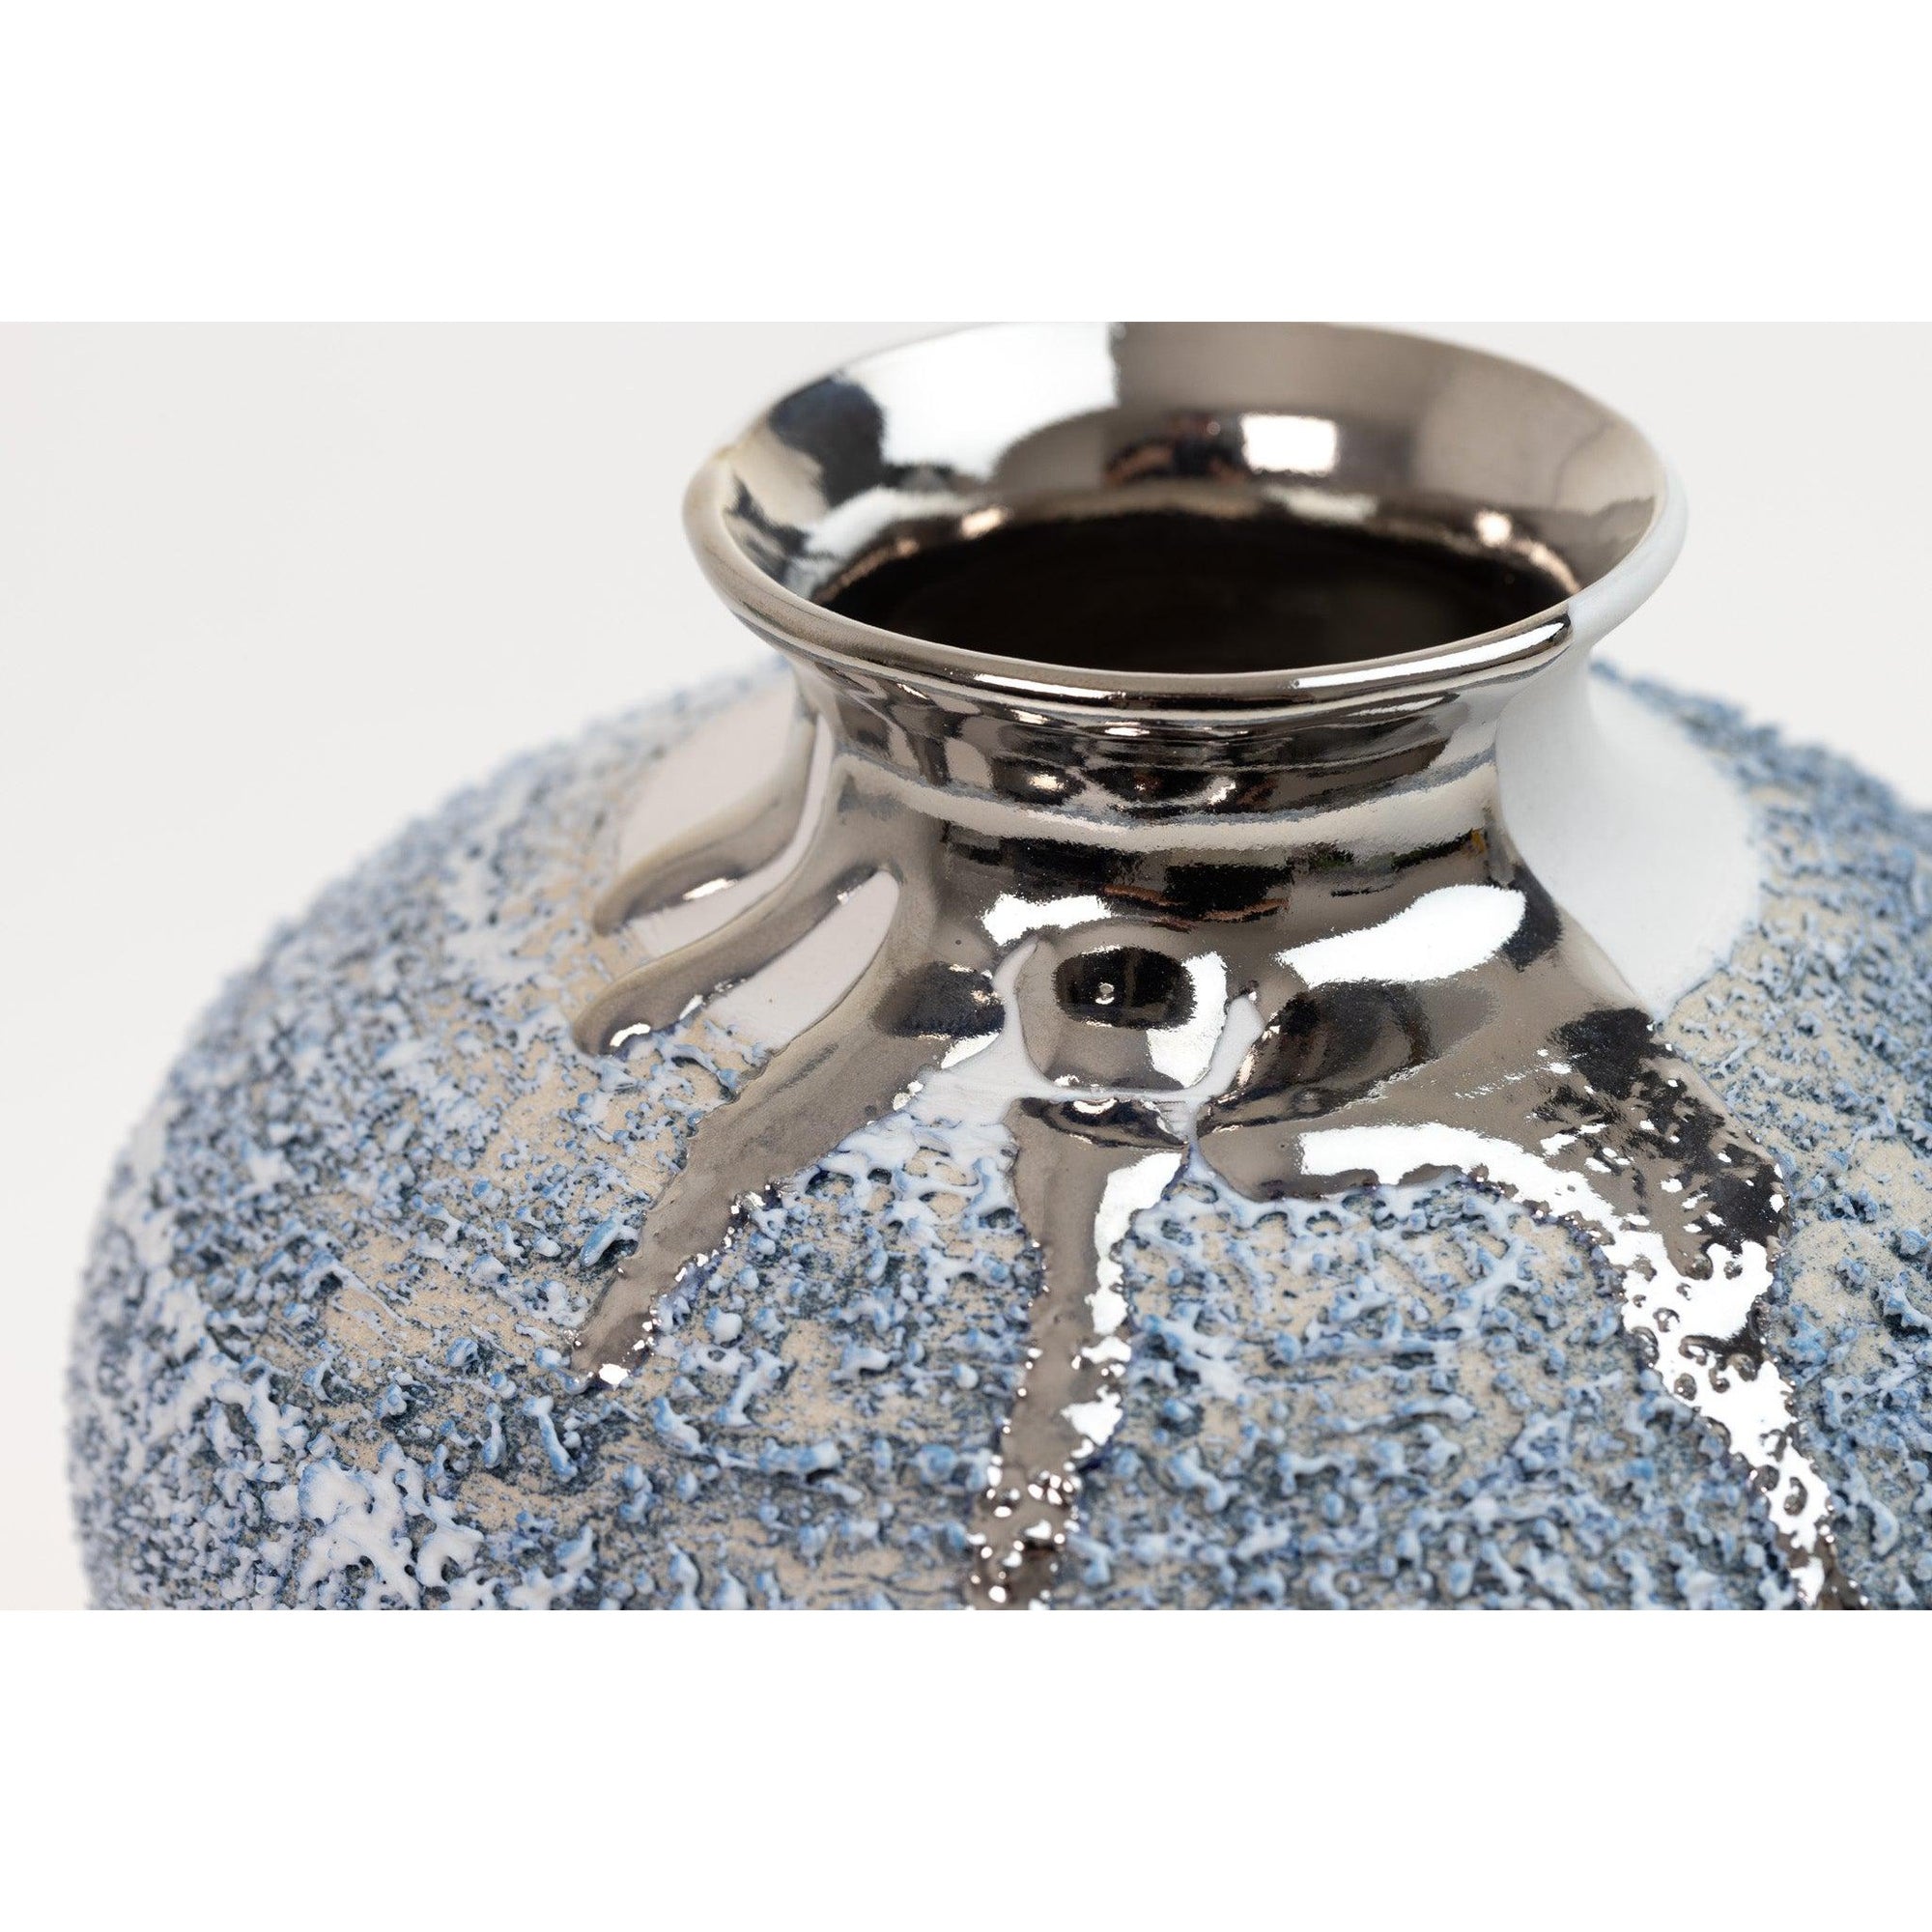 AMC172 Textured vessel with Platinum Lustre by Alex McCarthy available at Padstow Gallery, Cornwall